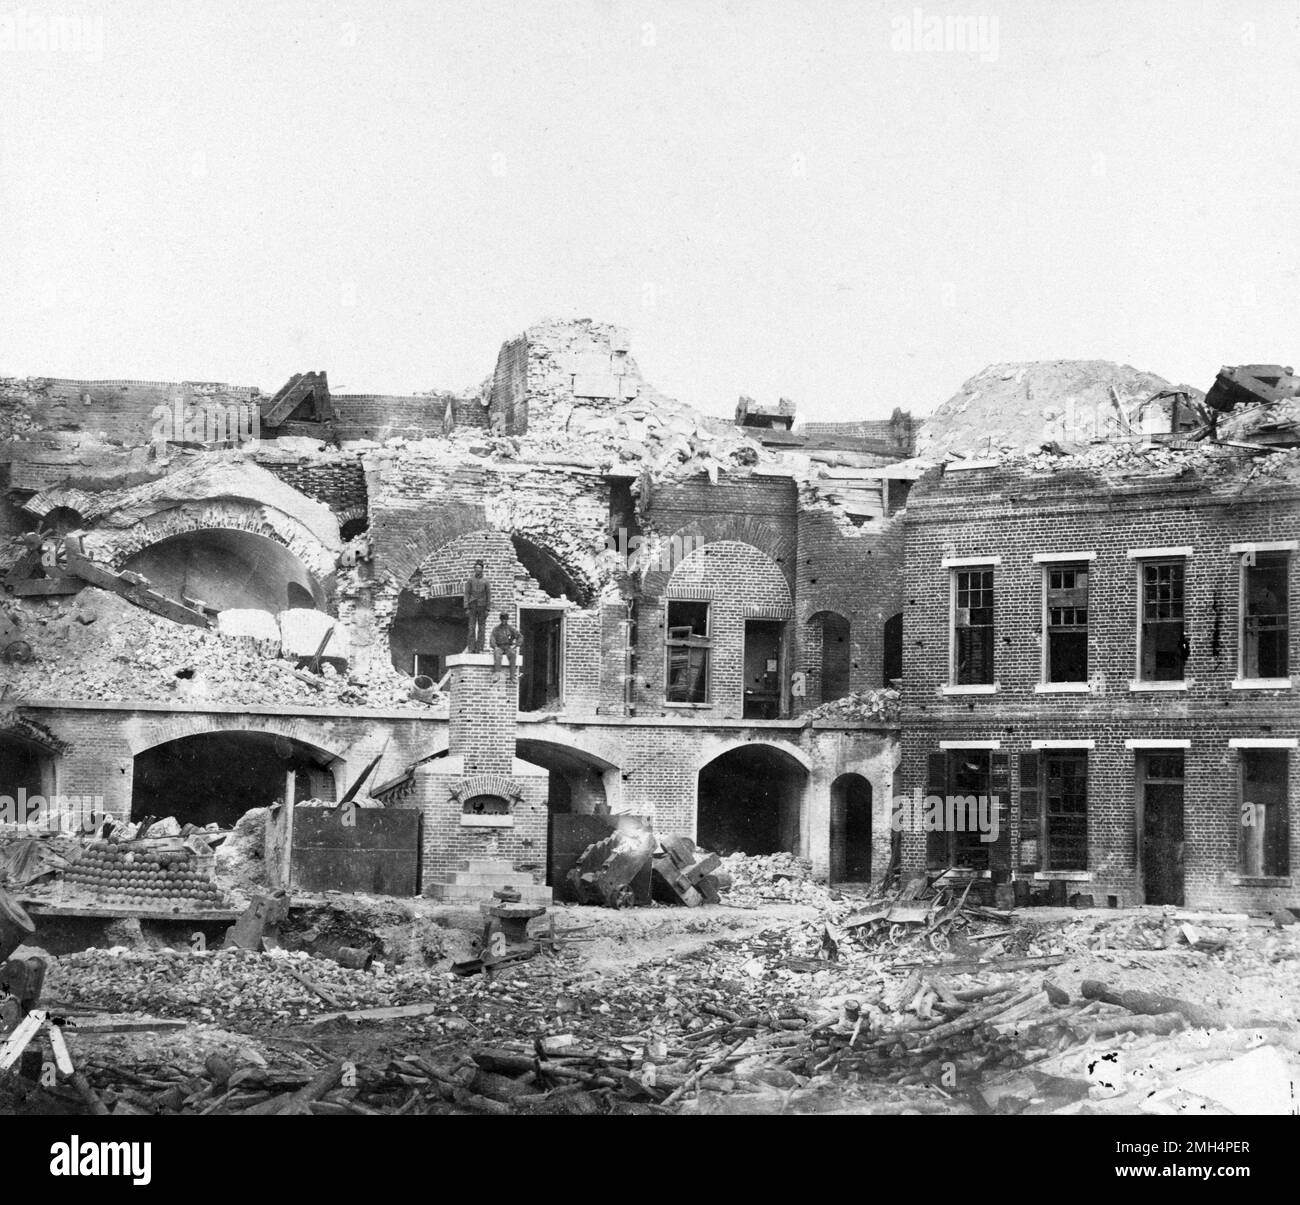 The ruins of Fort Sumter after is capture by the Confederate Army. The Confederate bombardment and capture of Fort Sumter was the opening battle in the American Ciil War. Stock Photo